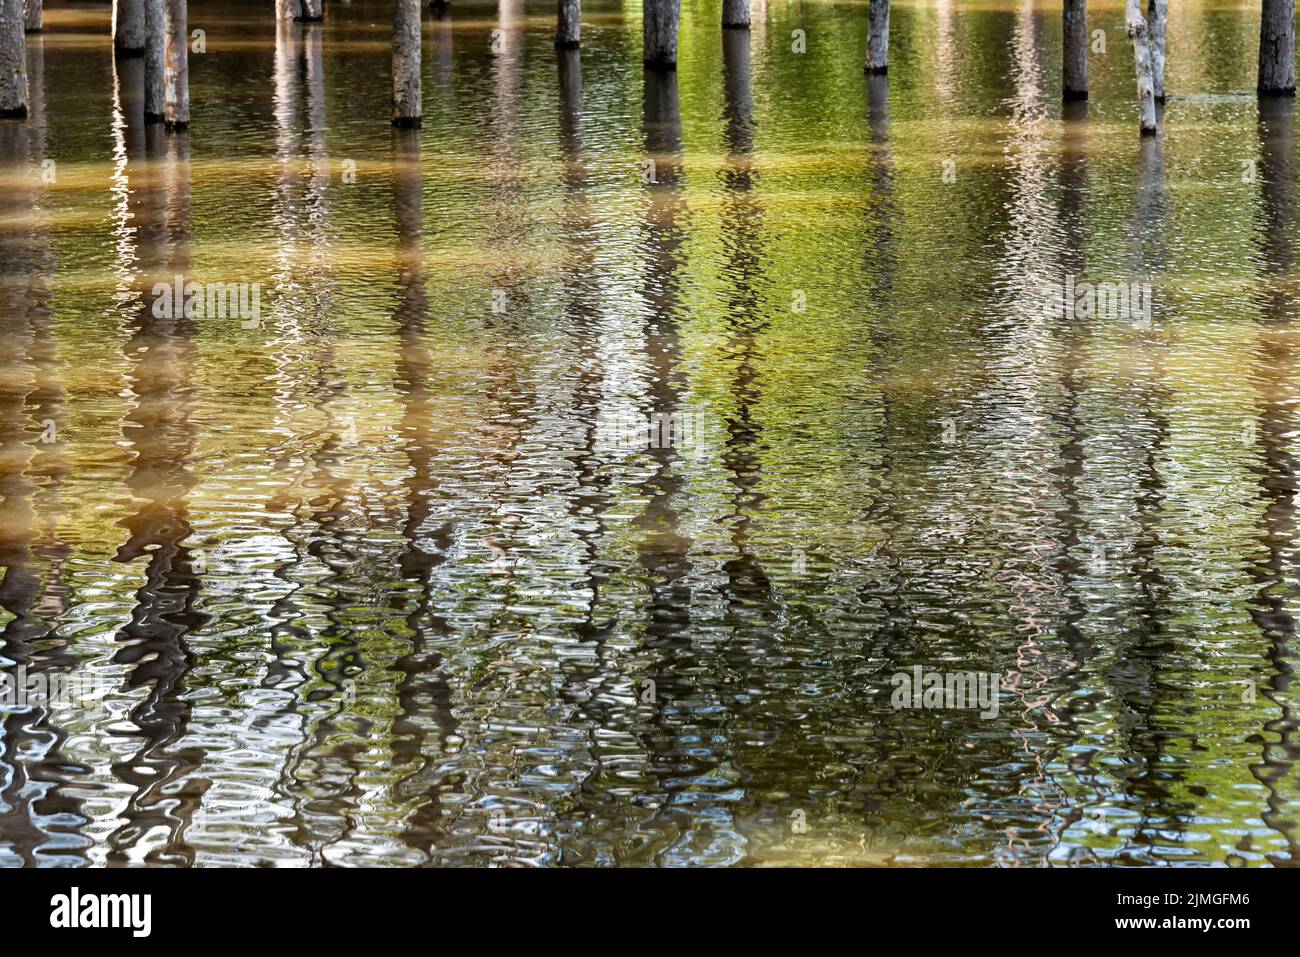 Trunks of trees partially submerged by water and their reflections Stock Photo